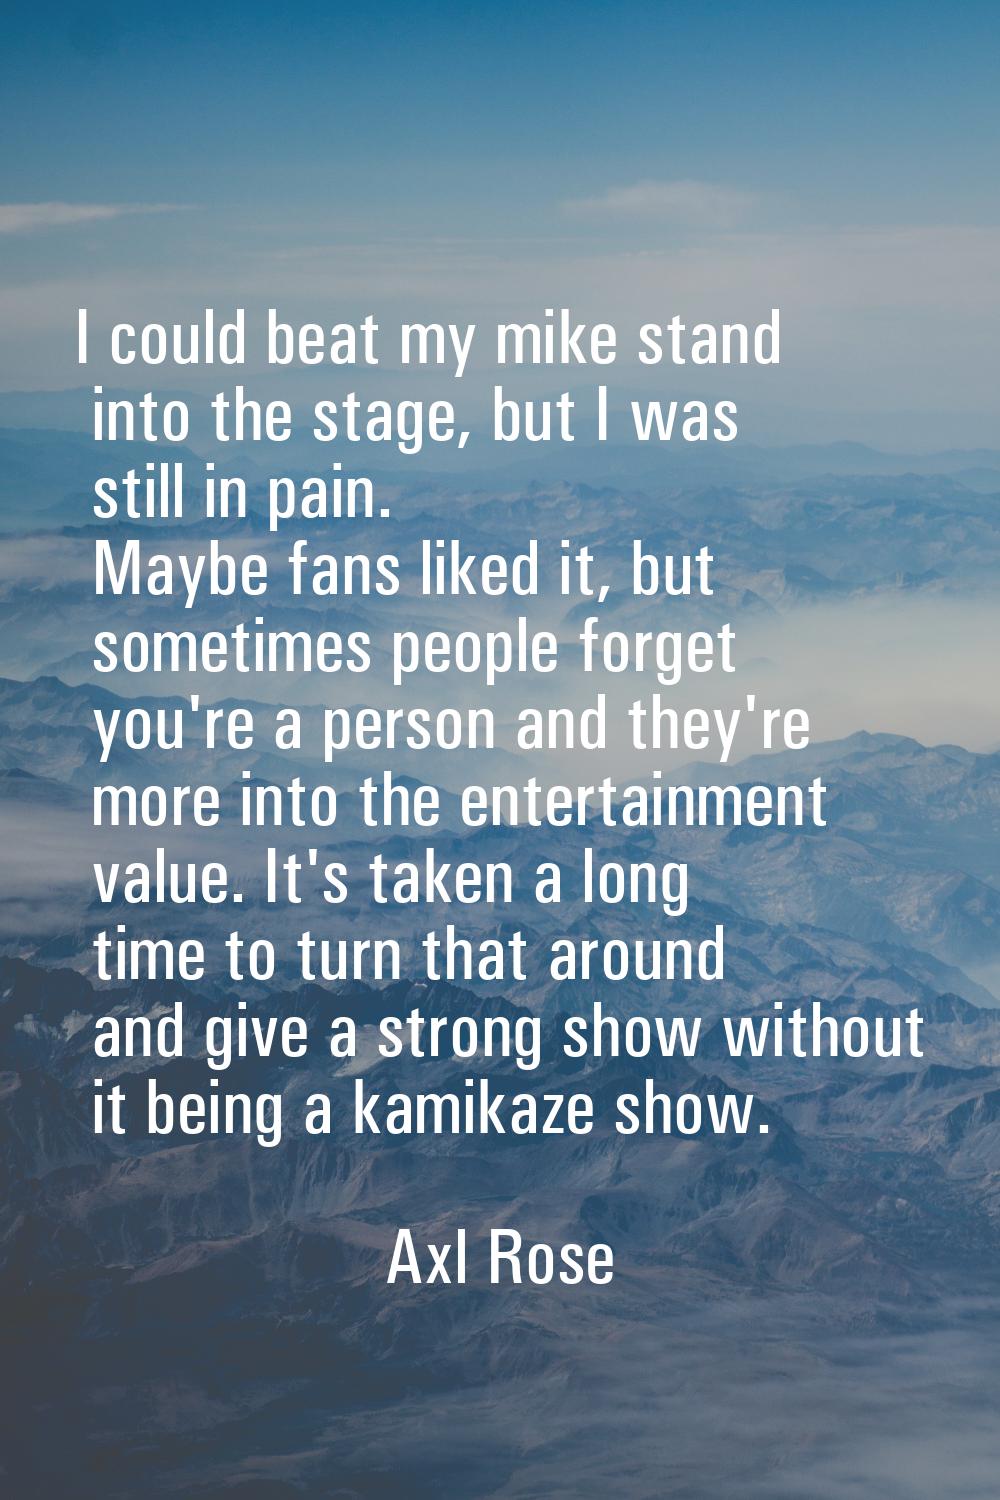 I could beat my mike stand into the stage, but I was still in pain. Maybe fans liked it, but someti